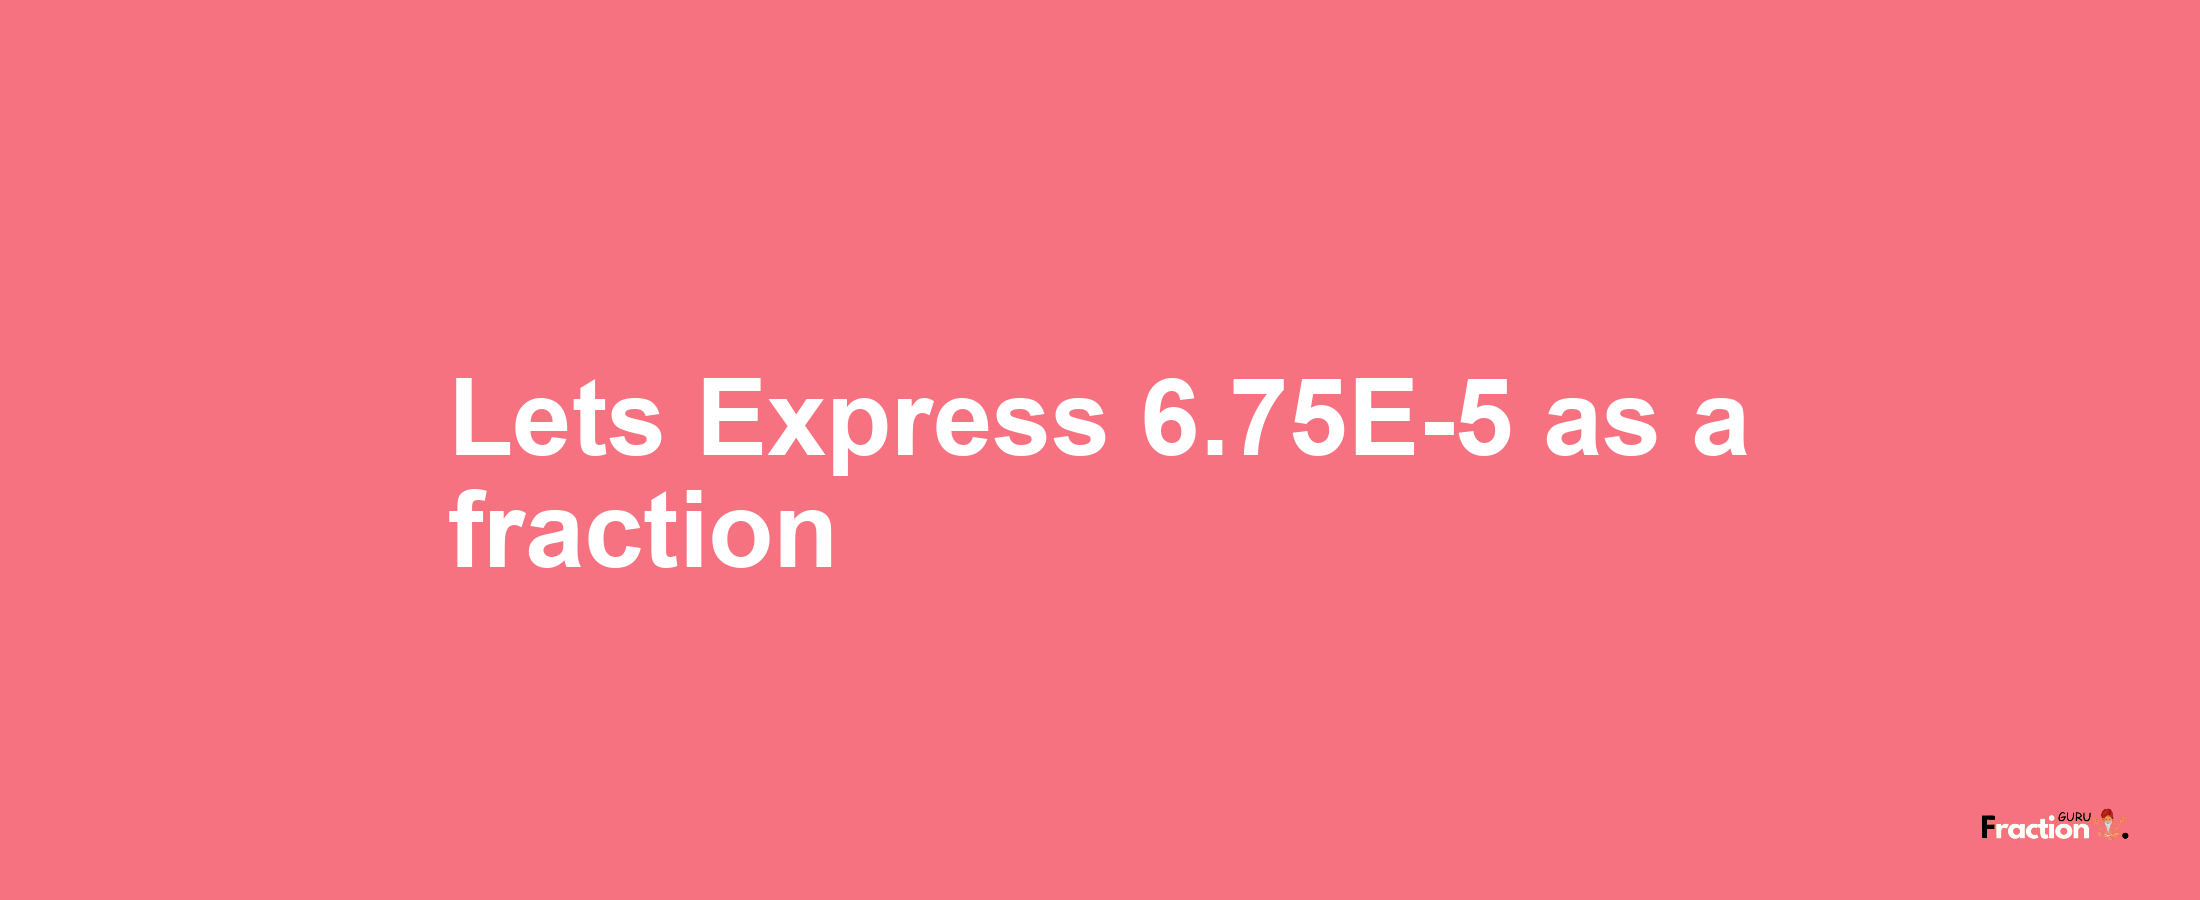 Lets Express 6.75E-5 as afraction